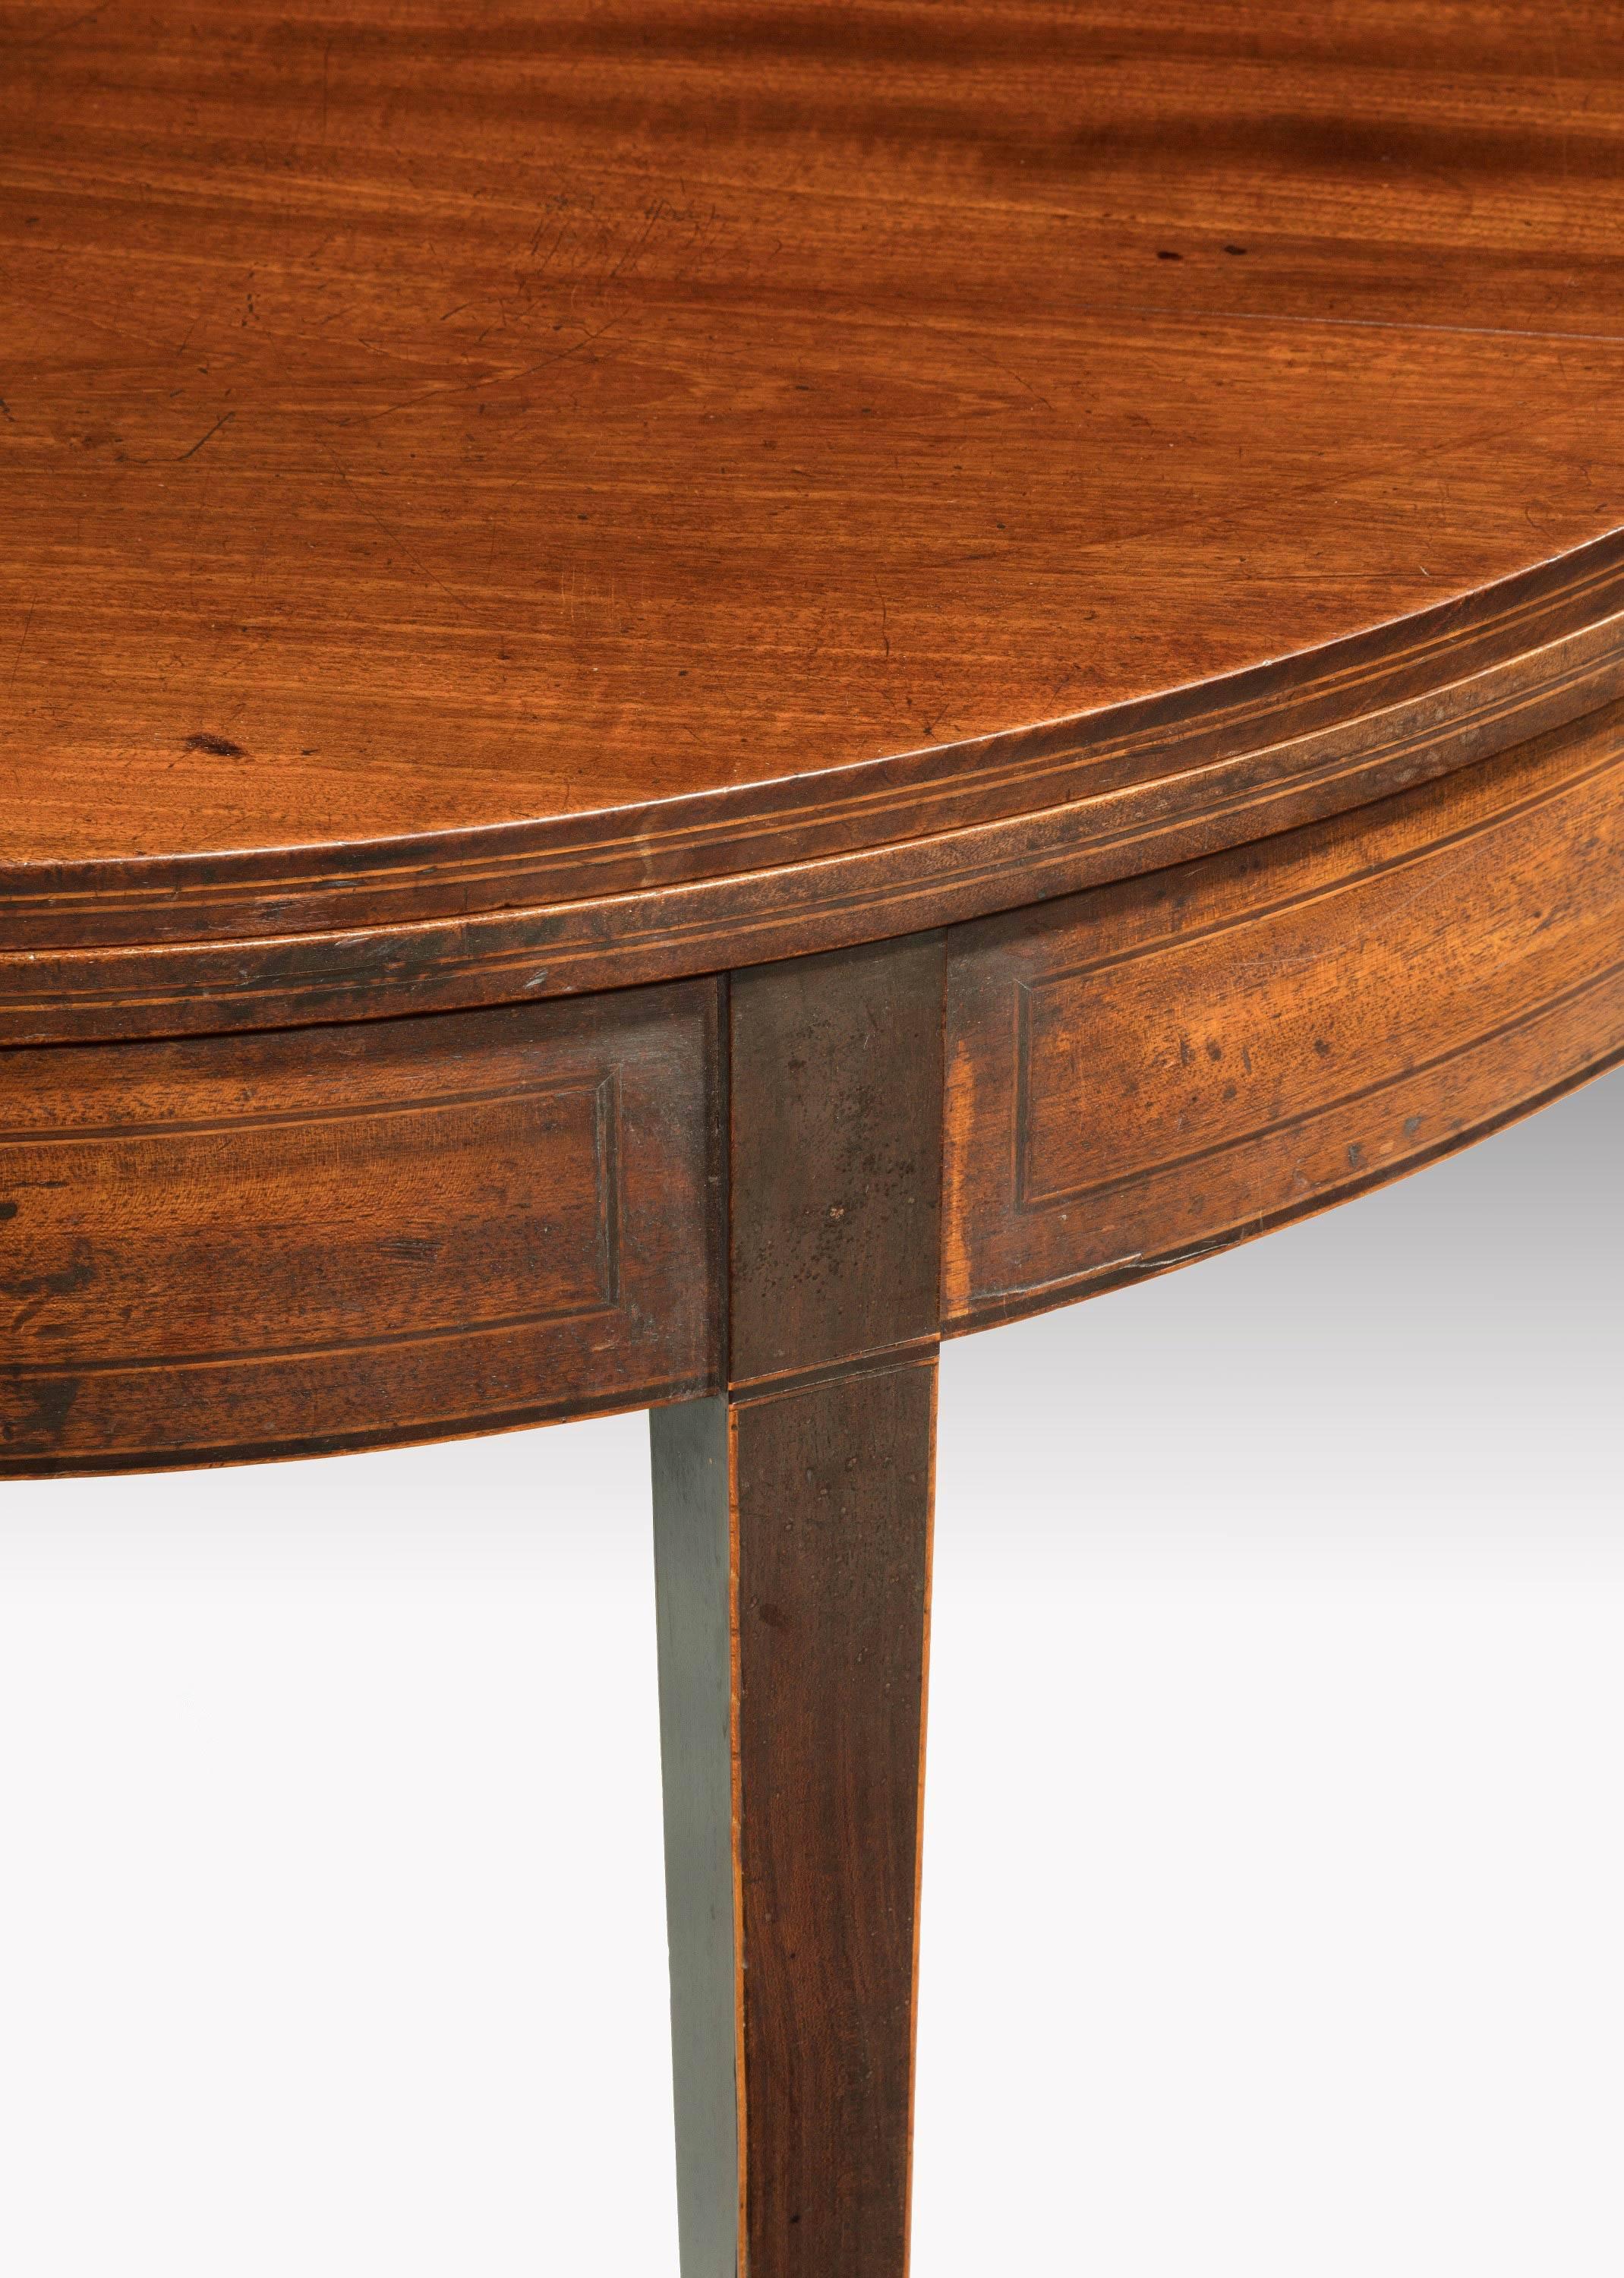 18th Century Pair of George III Period Mahogany Demilune Card Tables with Fine Line Inlay